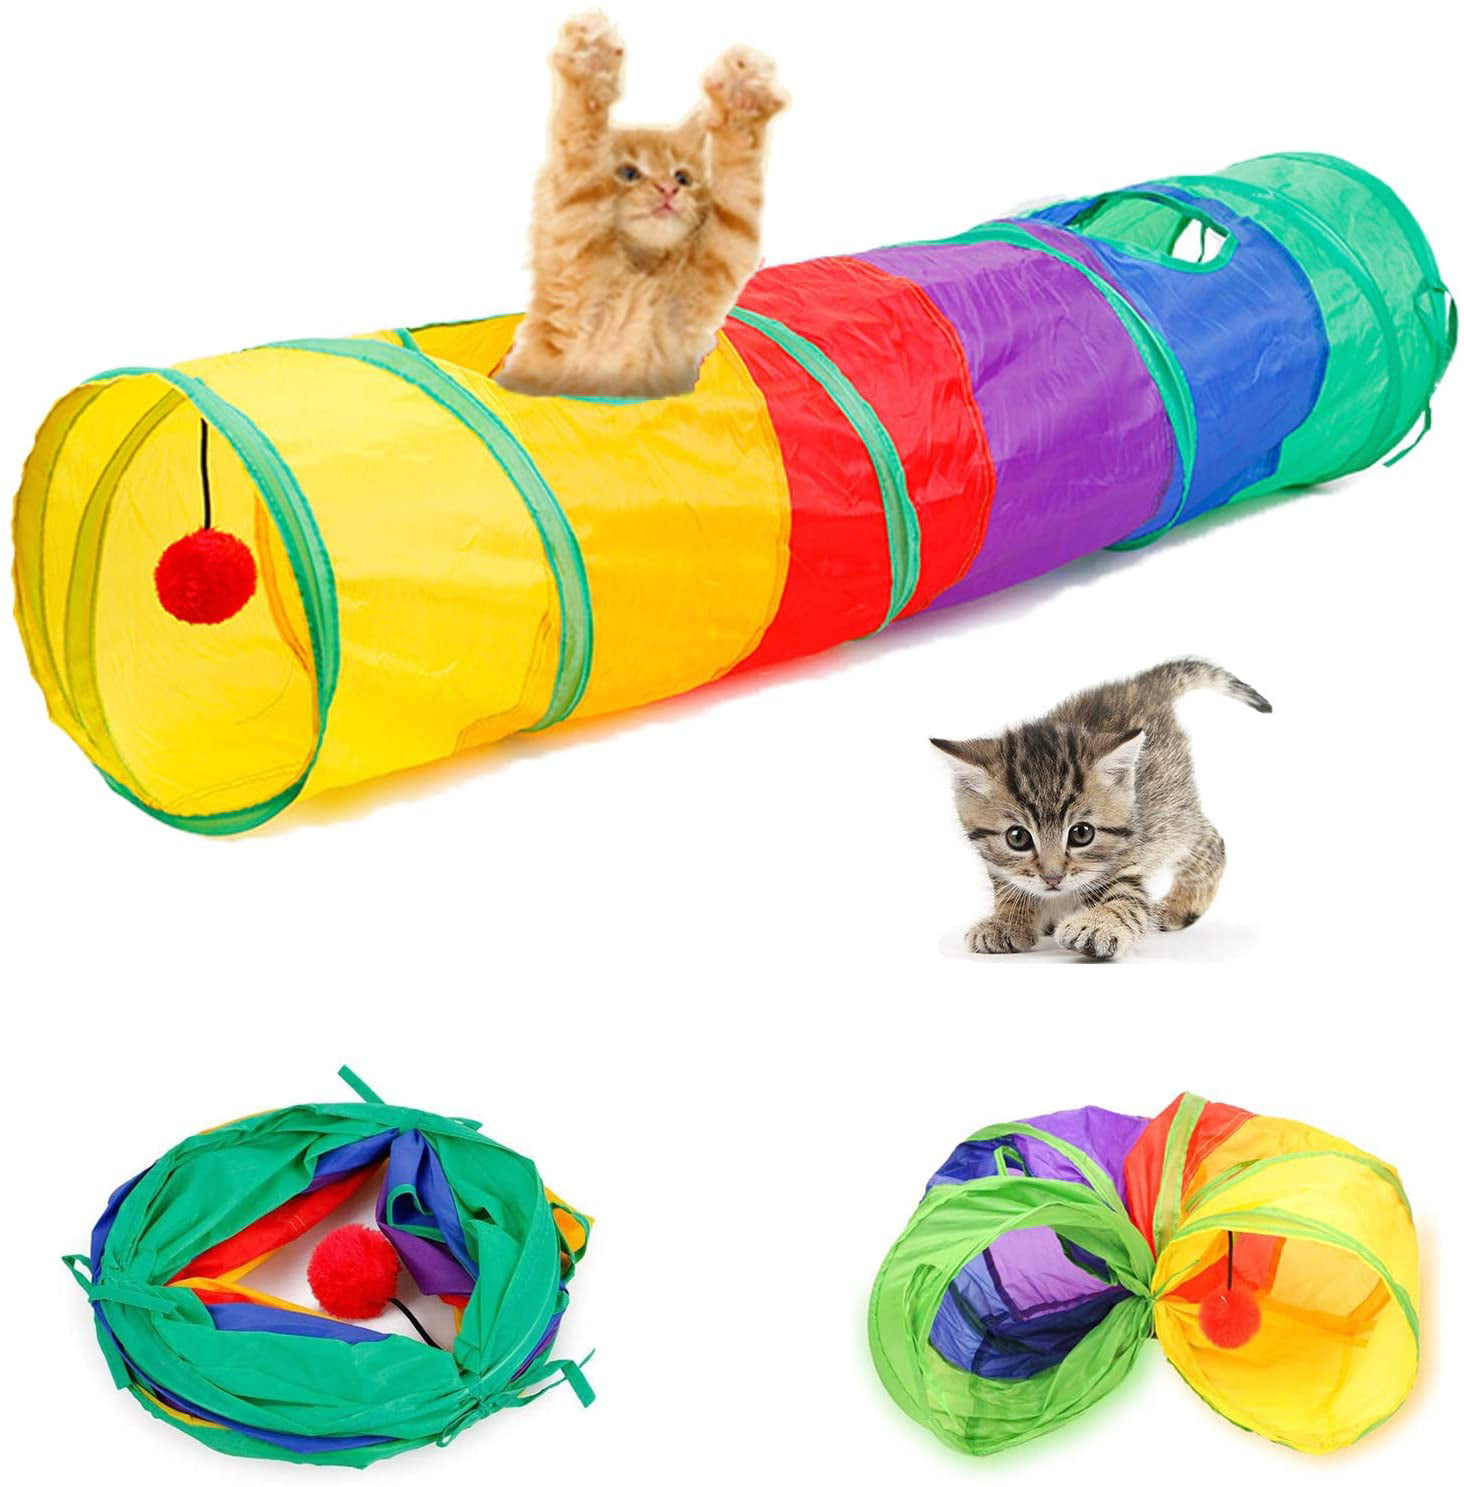 Collapsible Tunnel Tube Leopard Print Foldable Cat Tent Long Tunnel Bed Toy for Pets Bunny Rabbits Kittens Ferrets Puppy and Dog Cat Tunnel Toys Green 